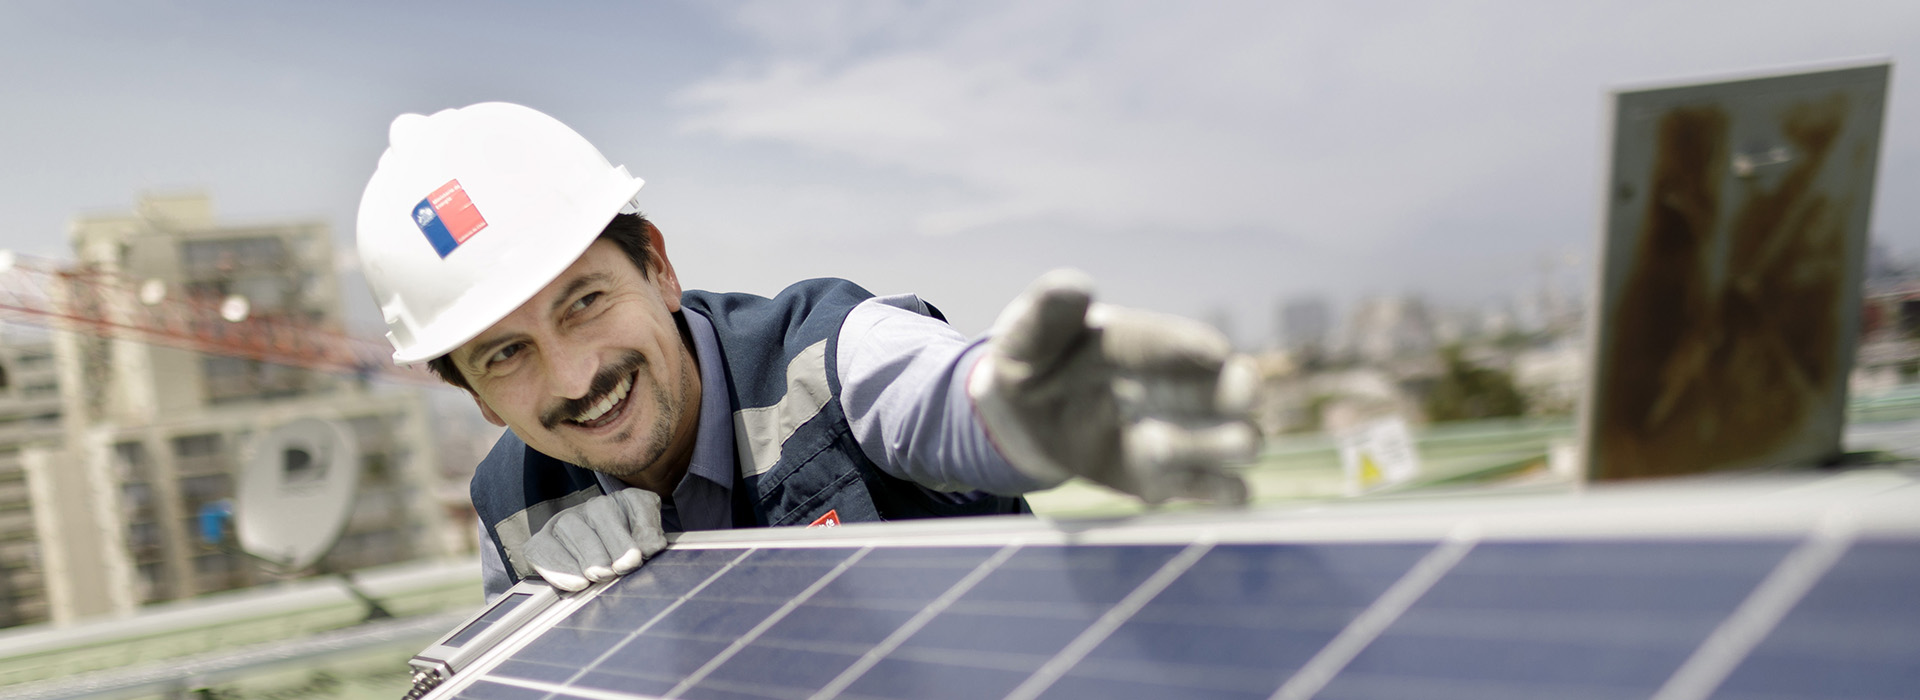 A construction worker wearing a hard hat works on a solar panel.